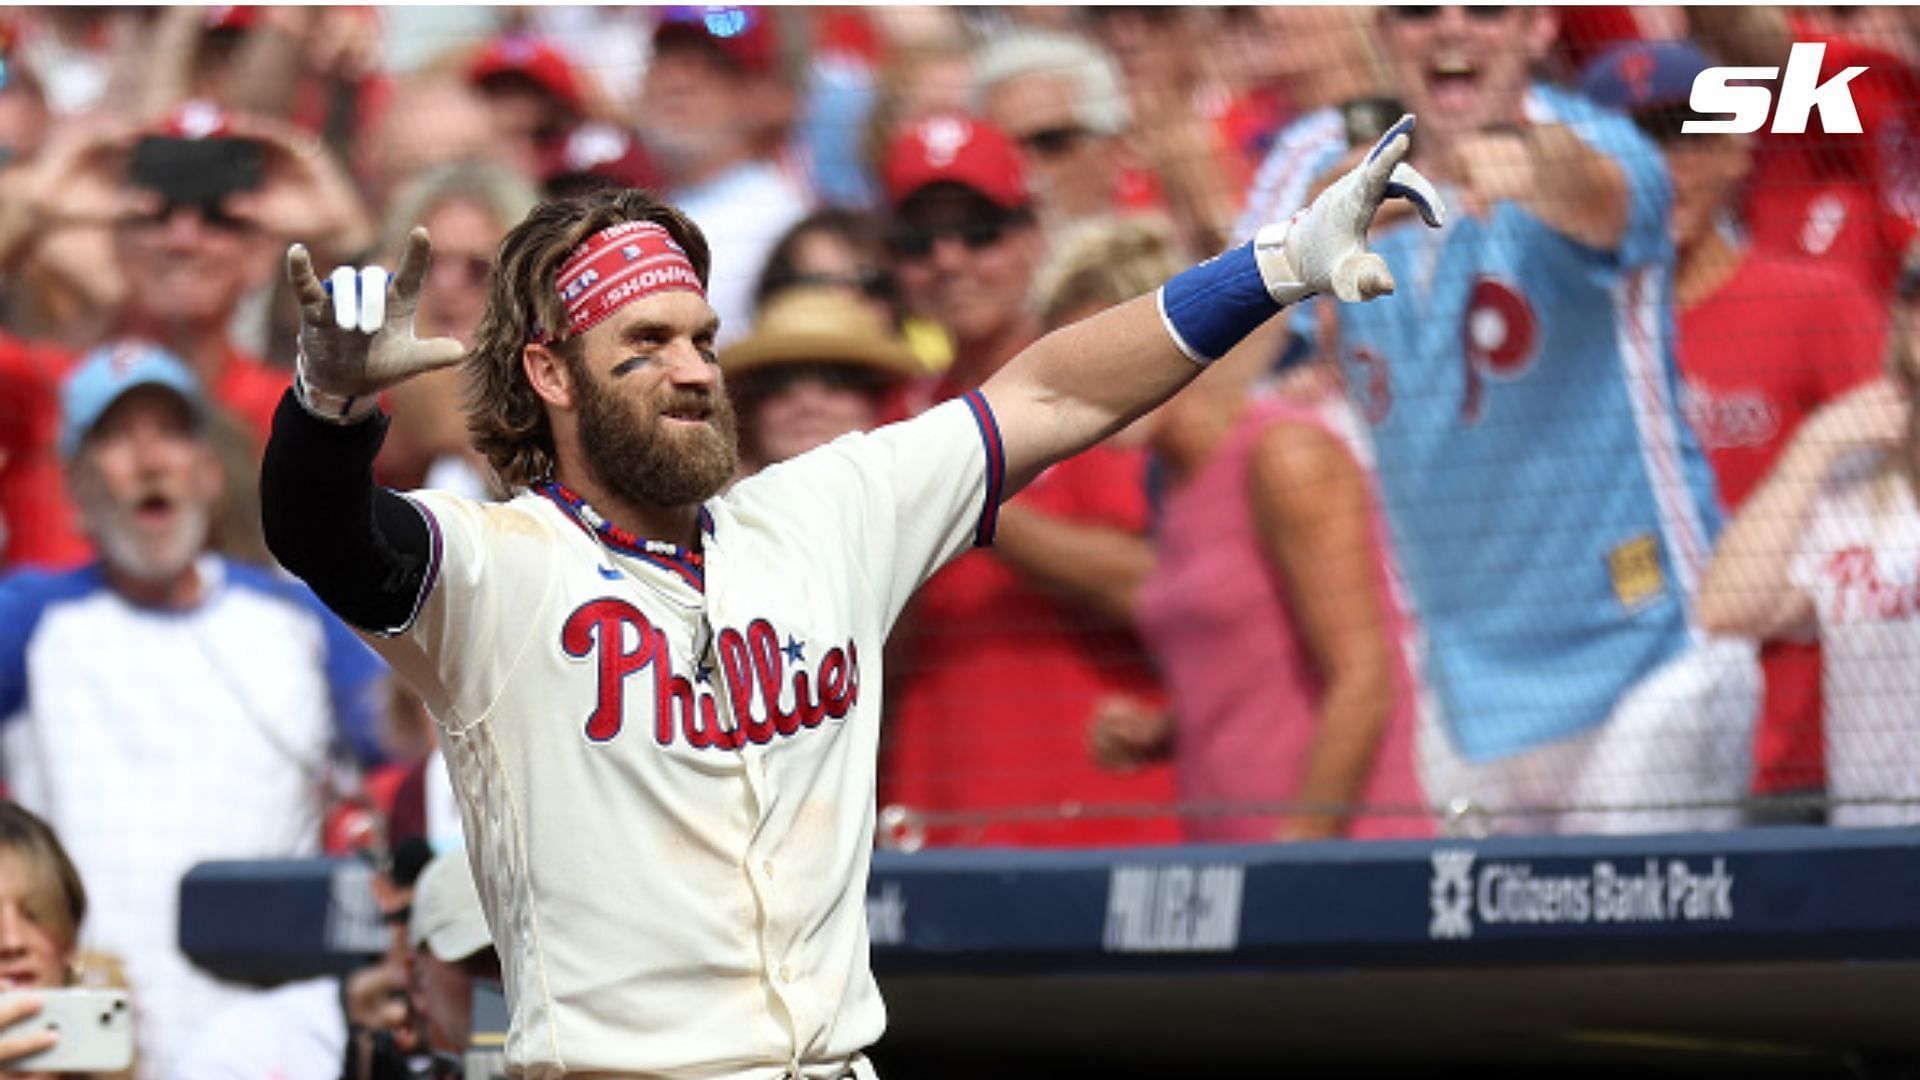 Bryce Harper reminisces over his admiration for the Yankees